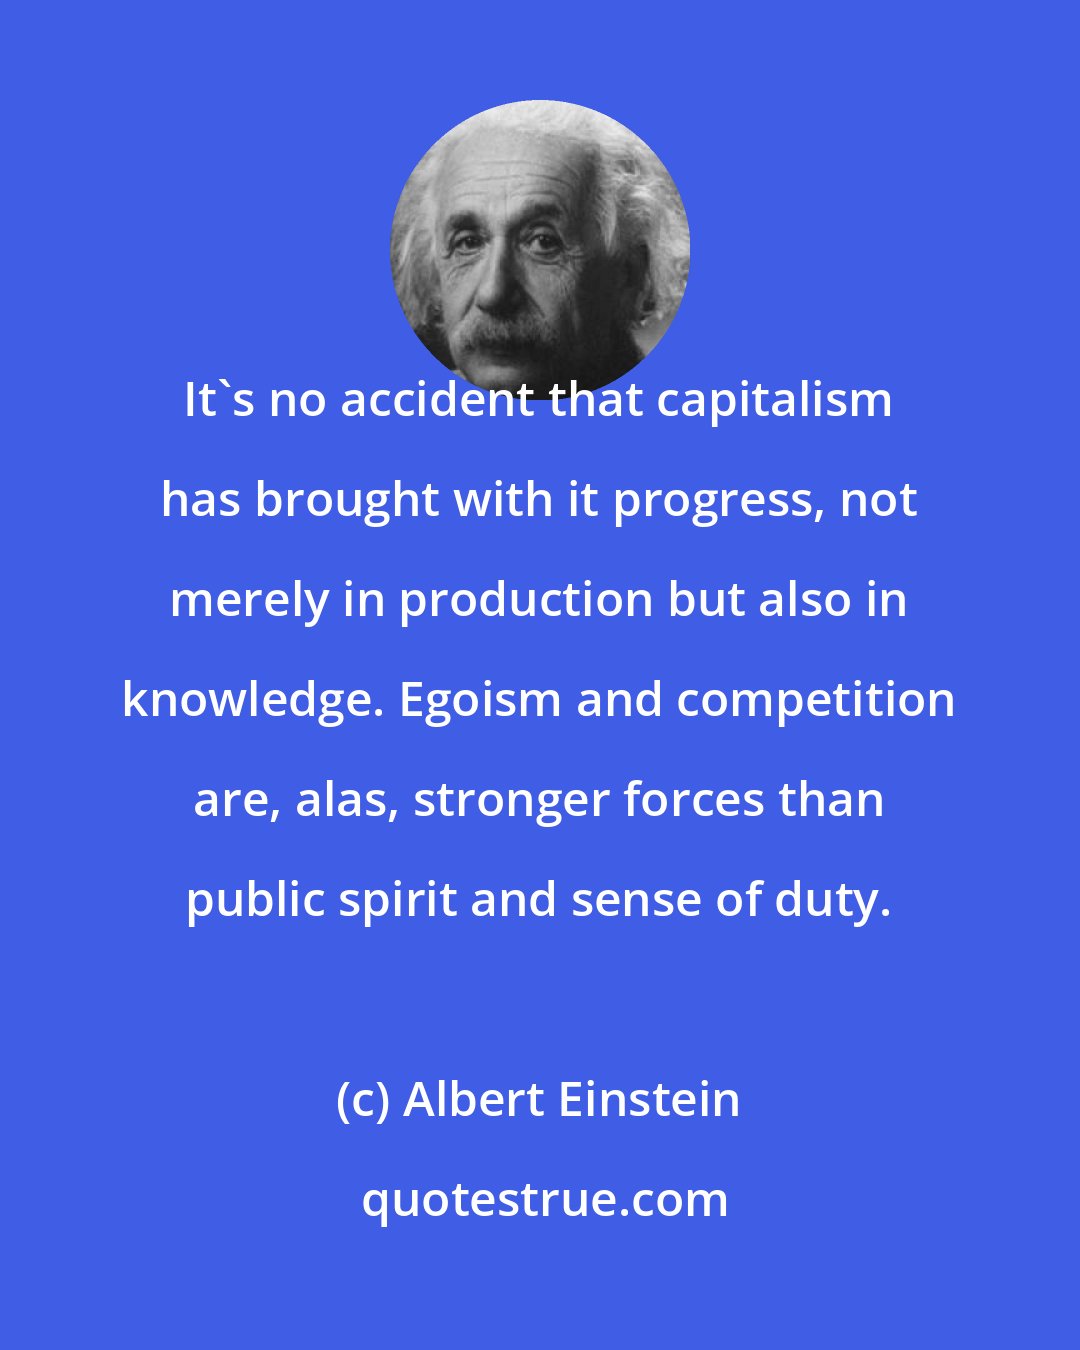 Albert Einstein: It's no accident that capitalism has brought with it progress, not merely in production but also in knowledge. Egoism and competition are, alas, stronger forces than public spirit and sense of duty.